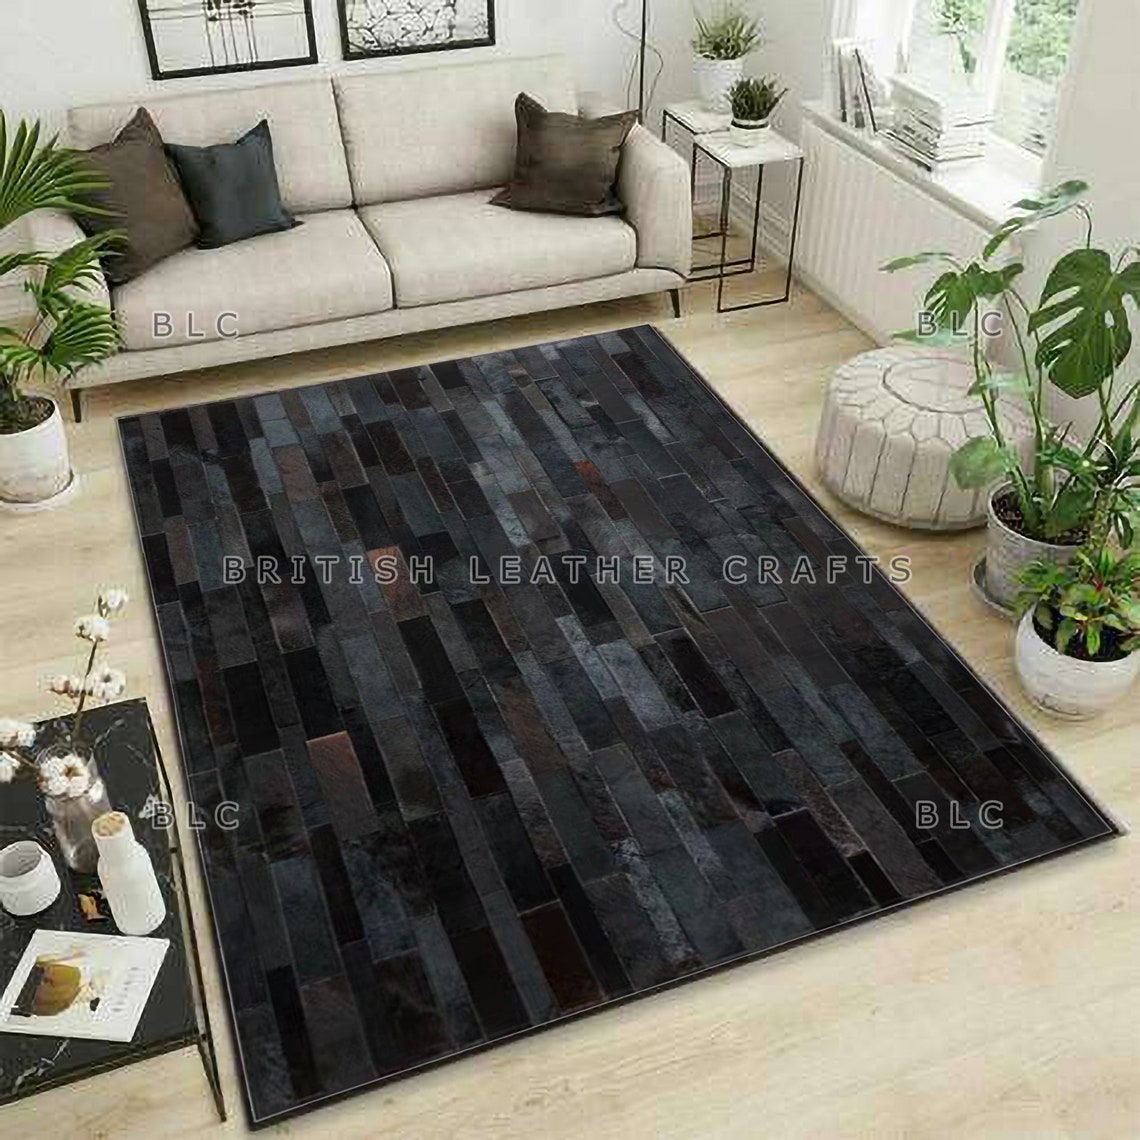 Cowhide Patchwork Area Rug - 100% Natural Hair on Leather Carpet - Cow Hide Leather Home Décor Rug (BLCPR29)